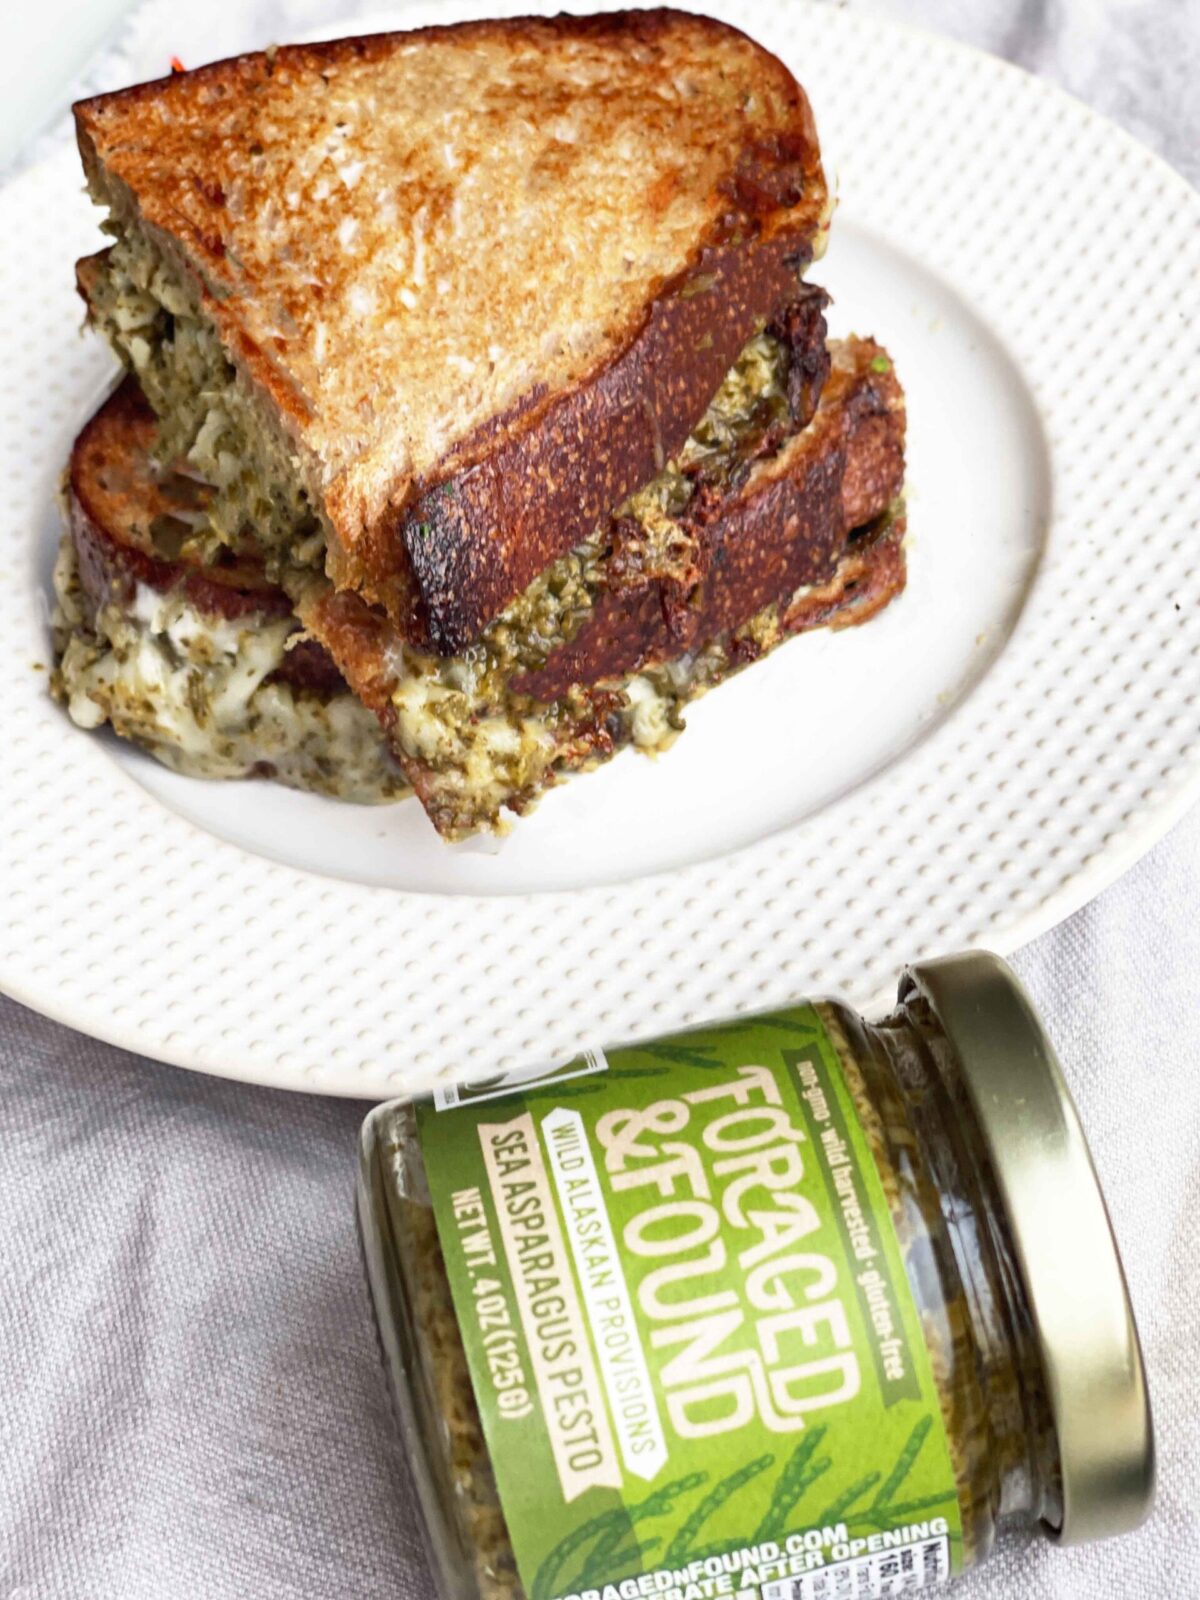 Pesto Grilled Cheese Recipe. This is an easy cheesy dinner idea for the perfect grilled cheese. Happy Cooking! www.ChopHappy.com #grilledcheese #pesto